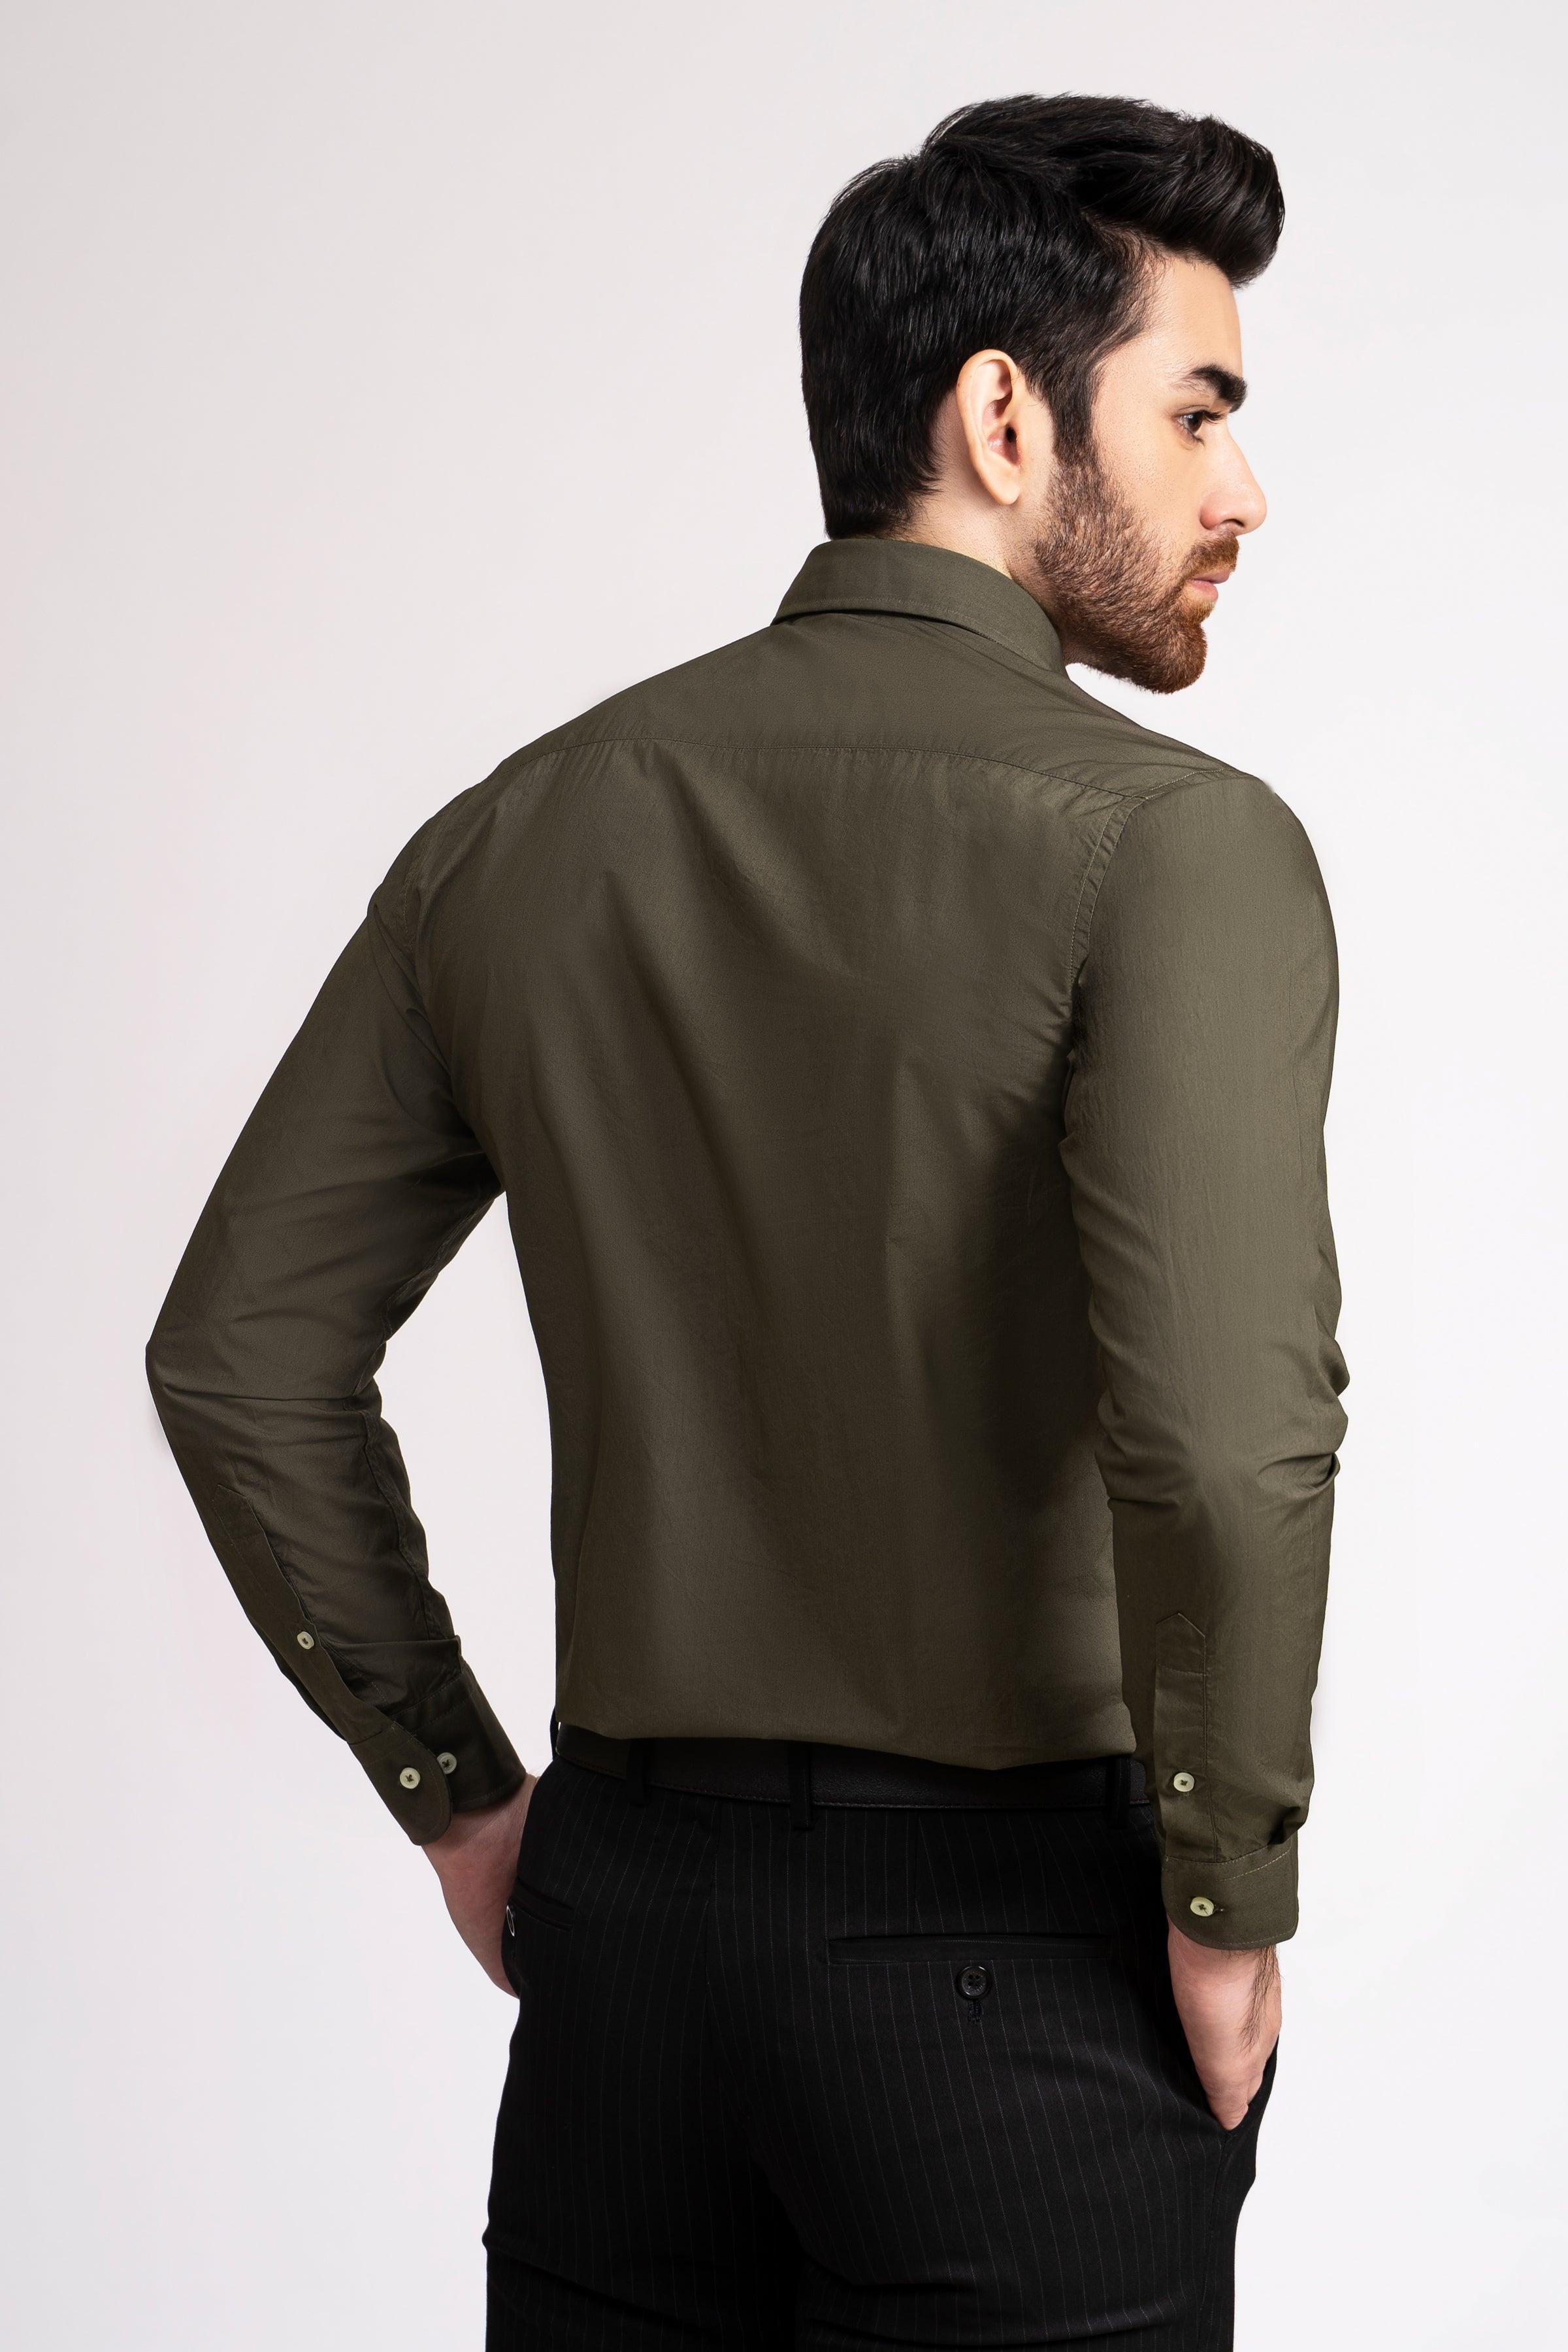 SEMI FORMAL SHIRT FRENCH COLLAR OLIVE at Charcoal Clothing